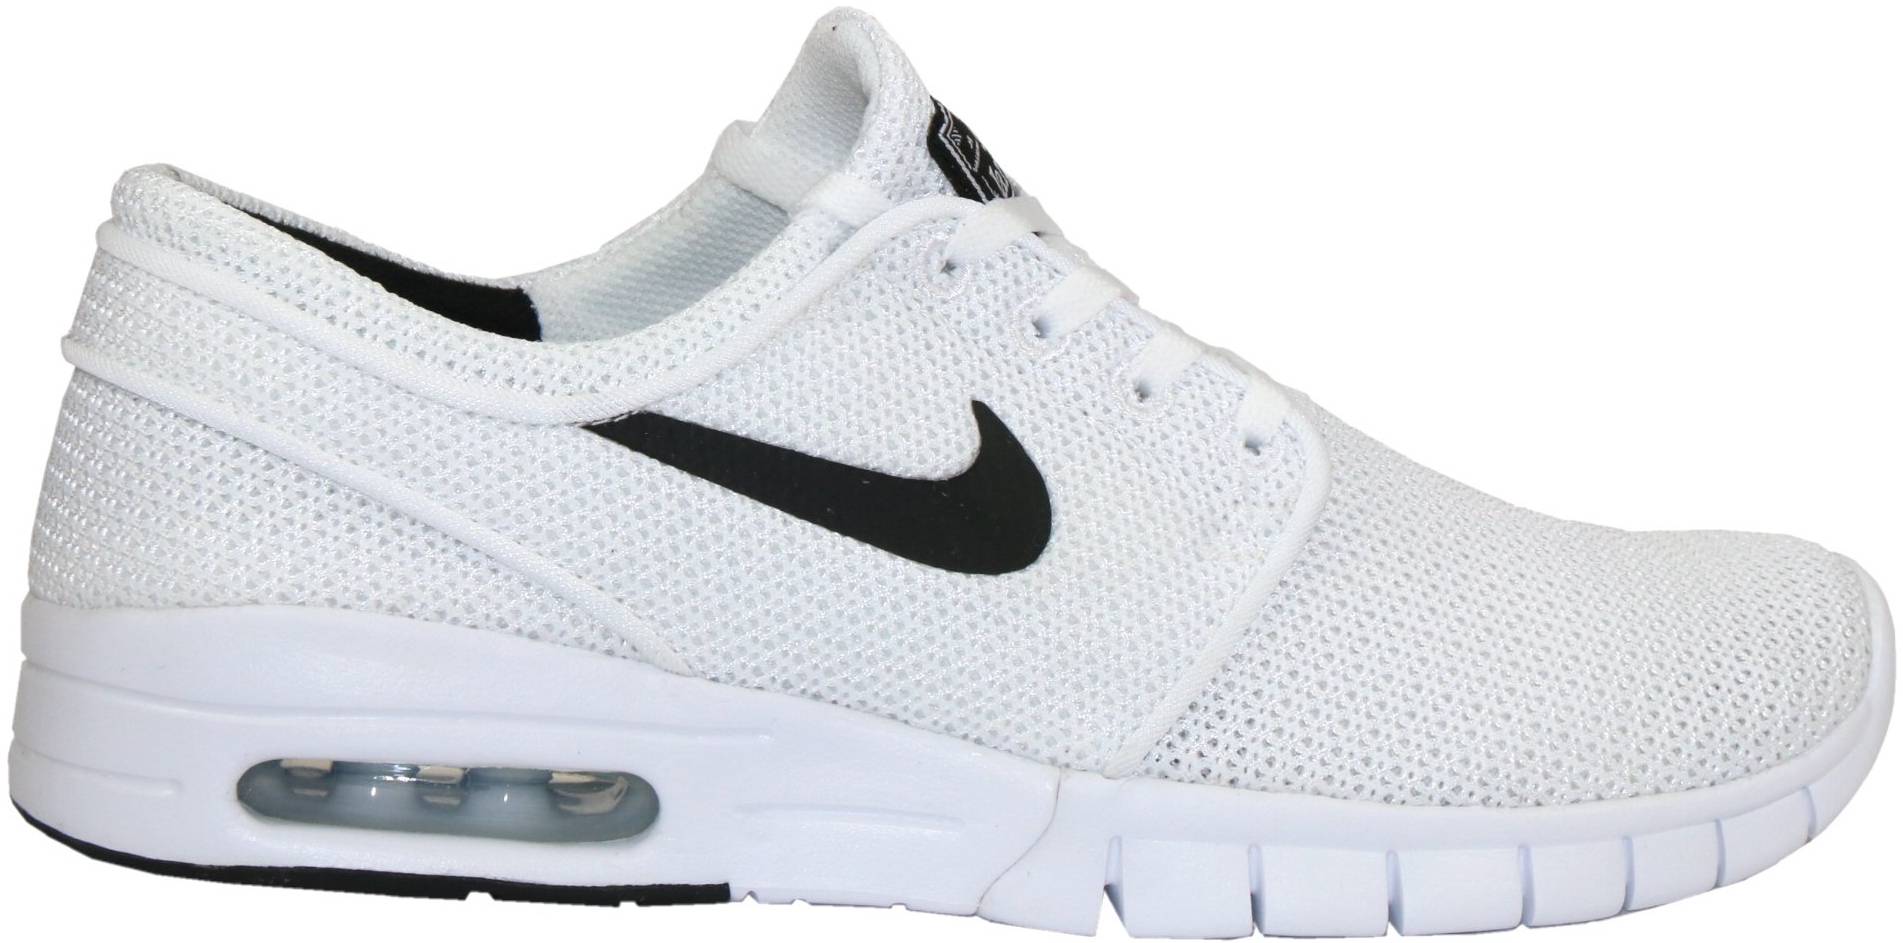 value Anyways comedy Nike SB Stefan Janoski Max sneakers in 10 colors (only $56) | RunRepeat